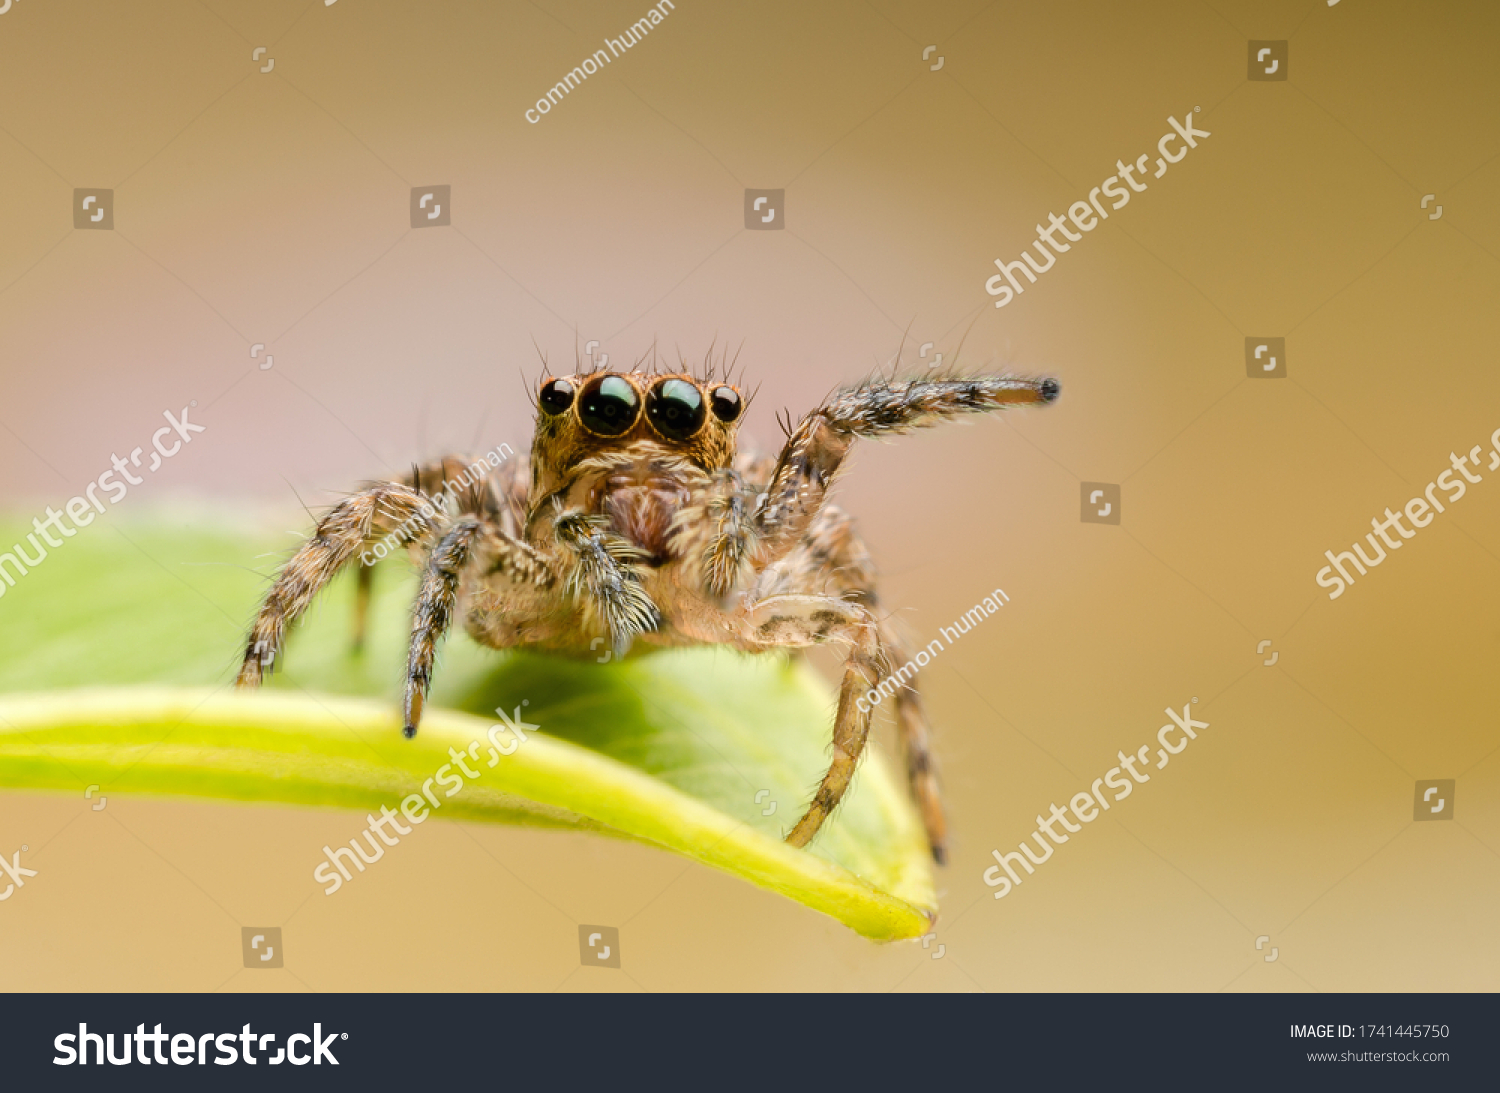 macro closeup on Hyllus semicupreus Jumping Spider. This spider is known to eat small insects like grasshoppers, flies, bees as well as other small spiders. #1741445750